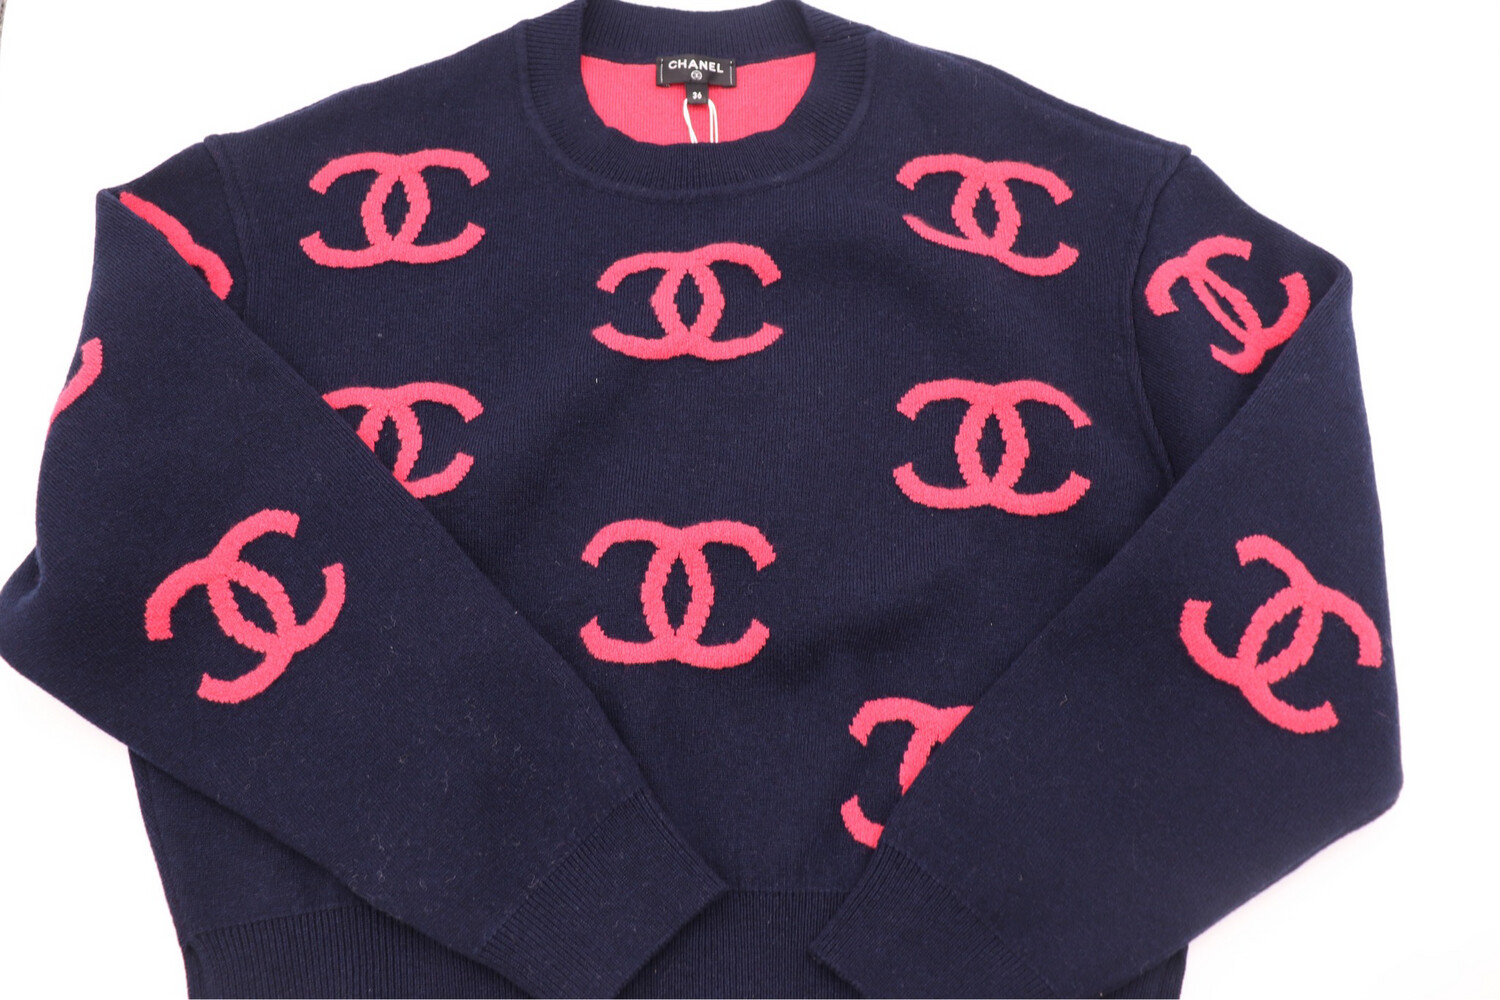 Chanel Sweater 21P, Pink And Navy, New in White Dustbag, Size 36